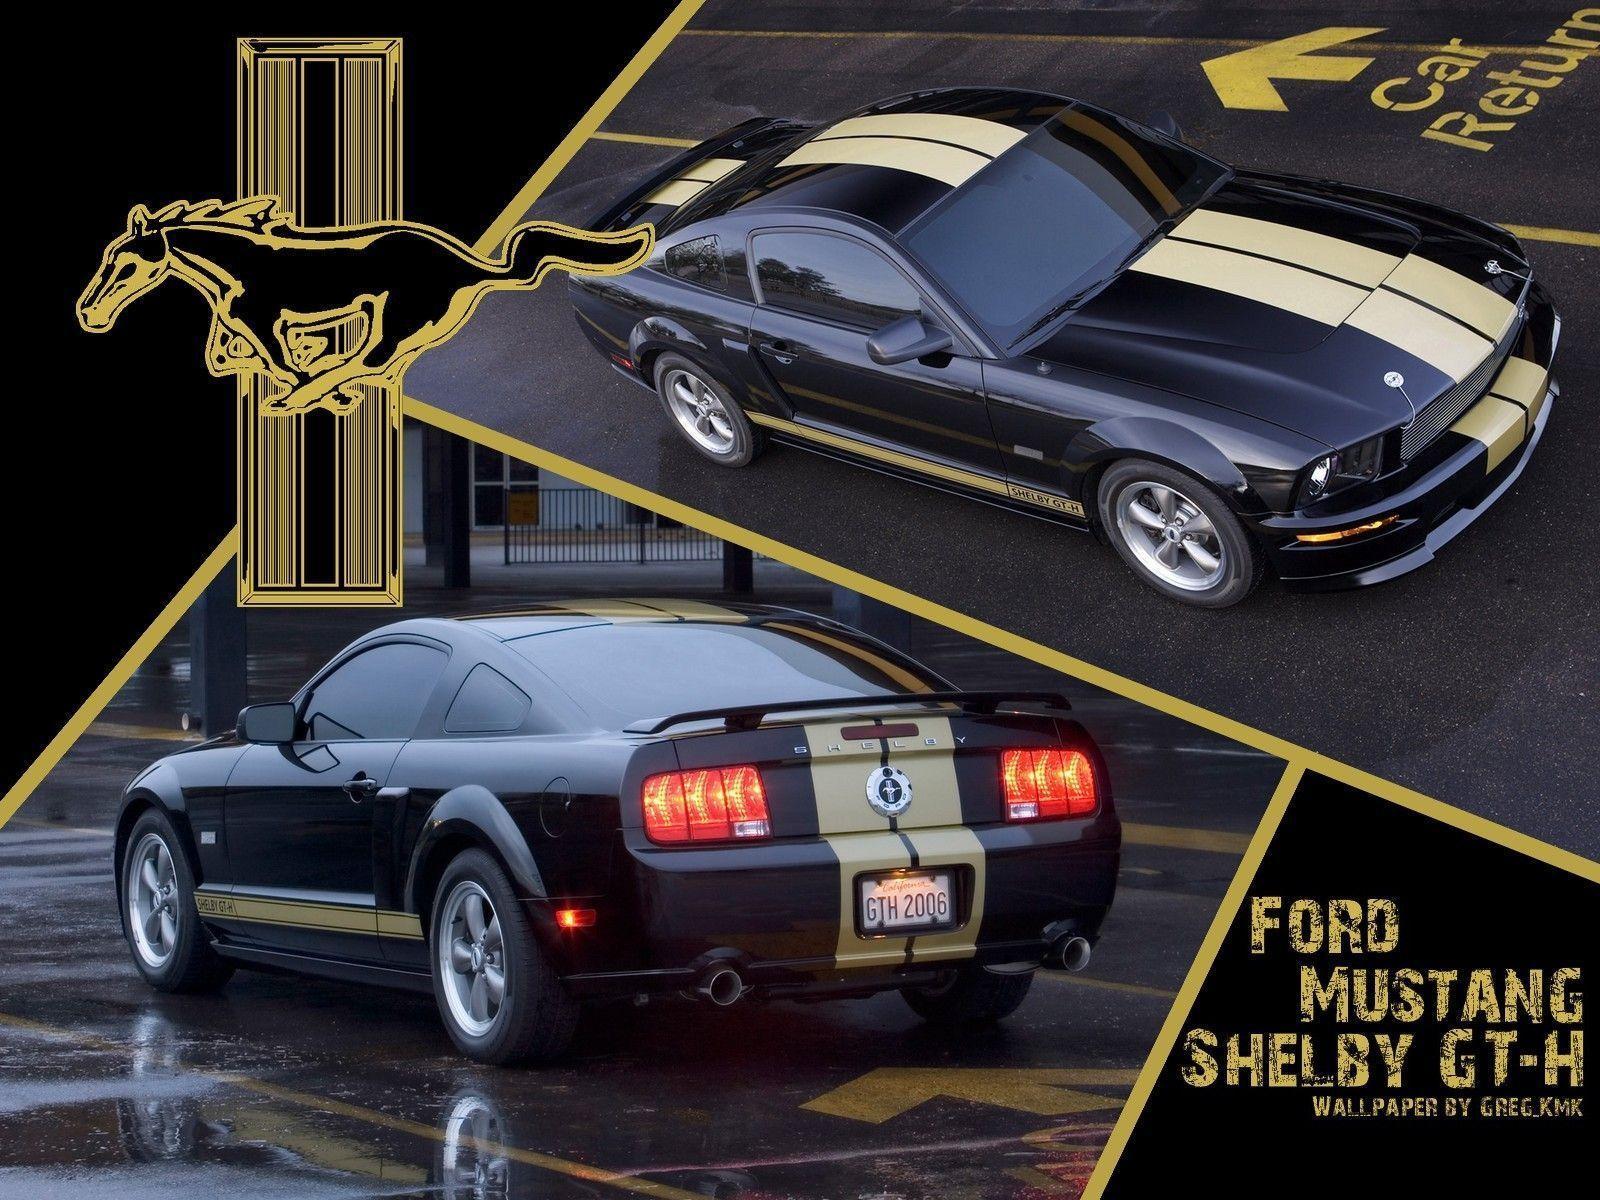 Ford Mustang Shelby GT H (Wallpaper By Greg_Kmk) (1600x1200) 58148